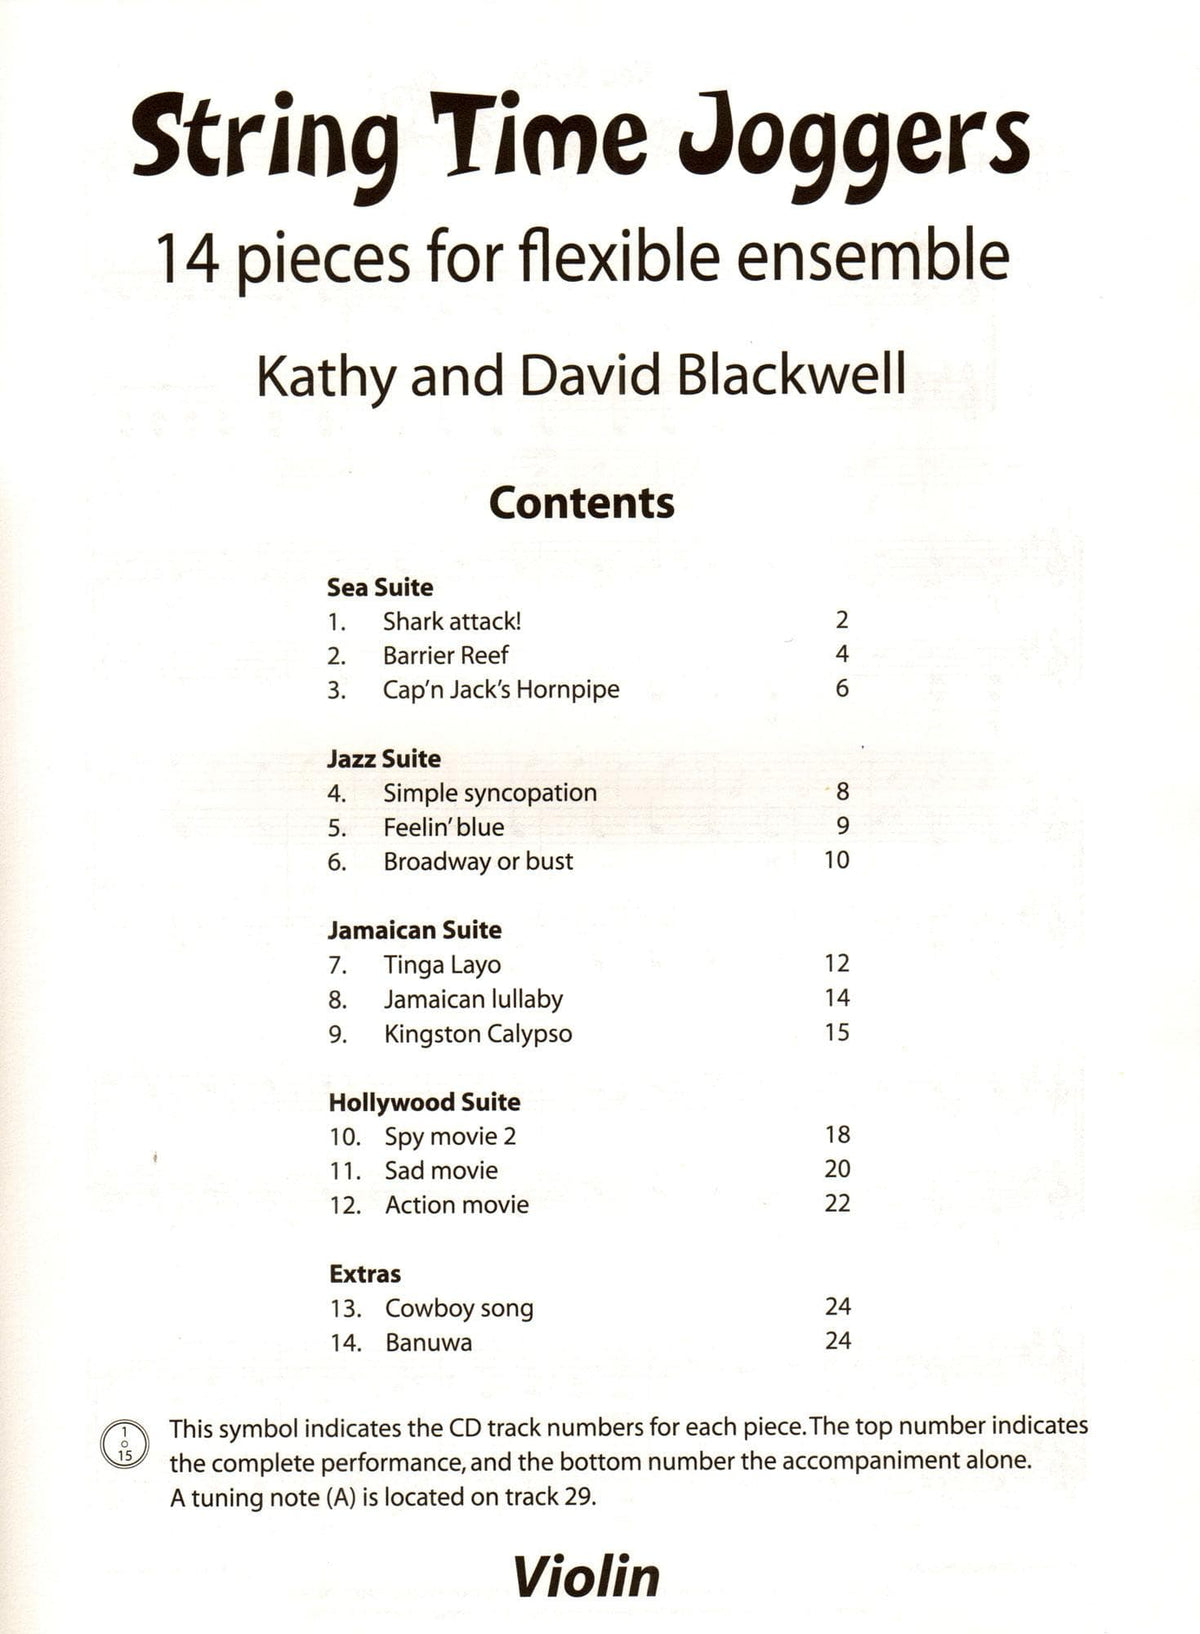 Blackwell, Kathy and David  - String Time Joggers for Violin - Oxford University Press